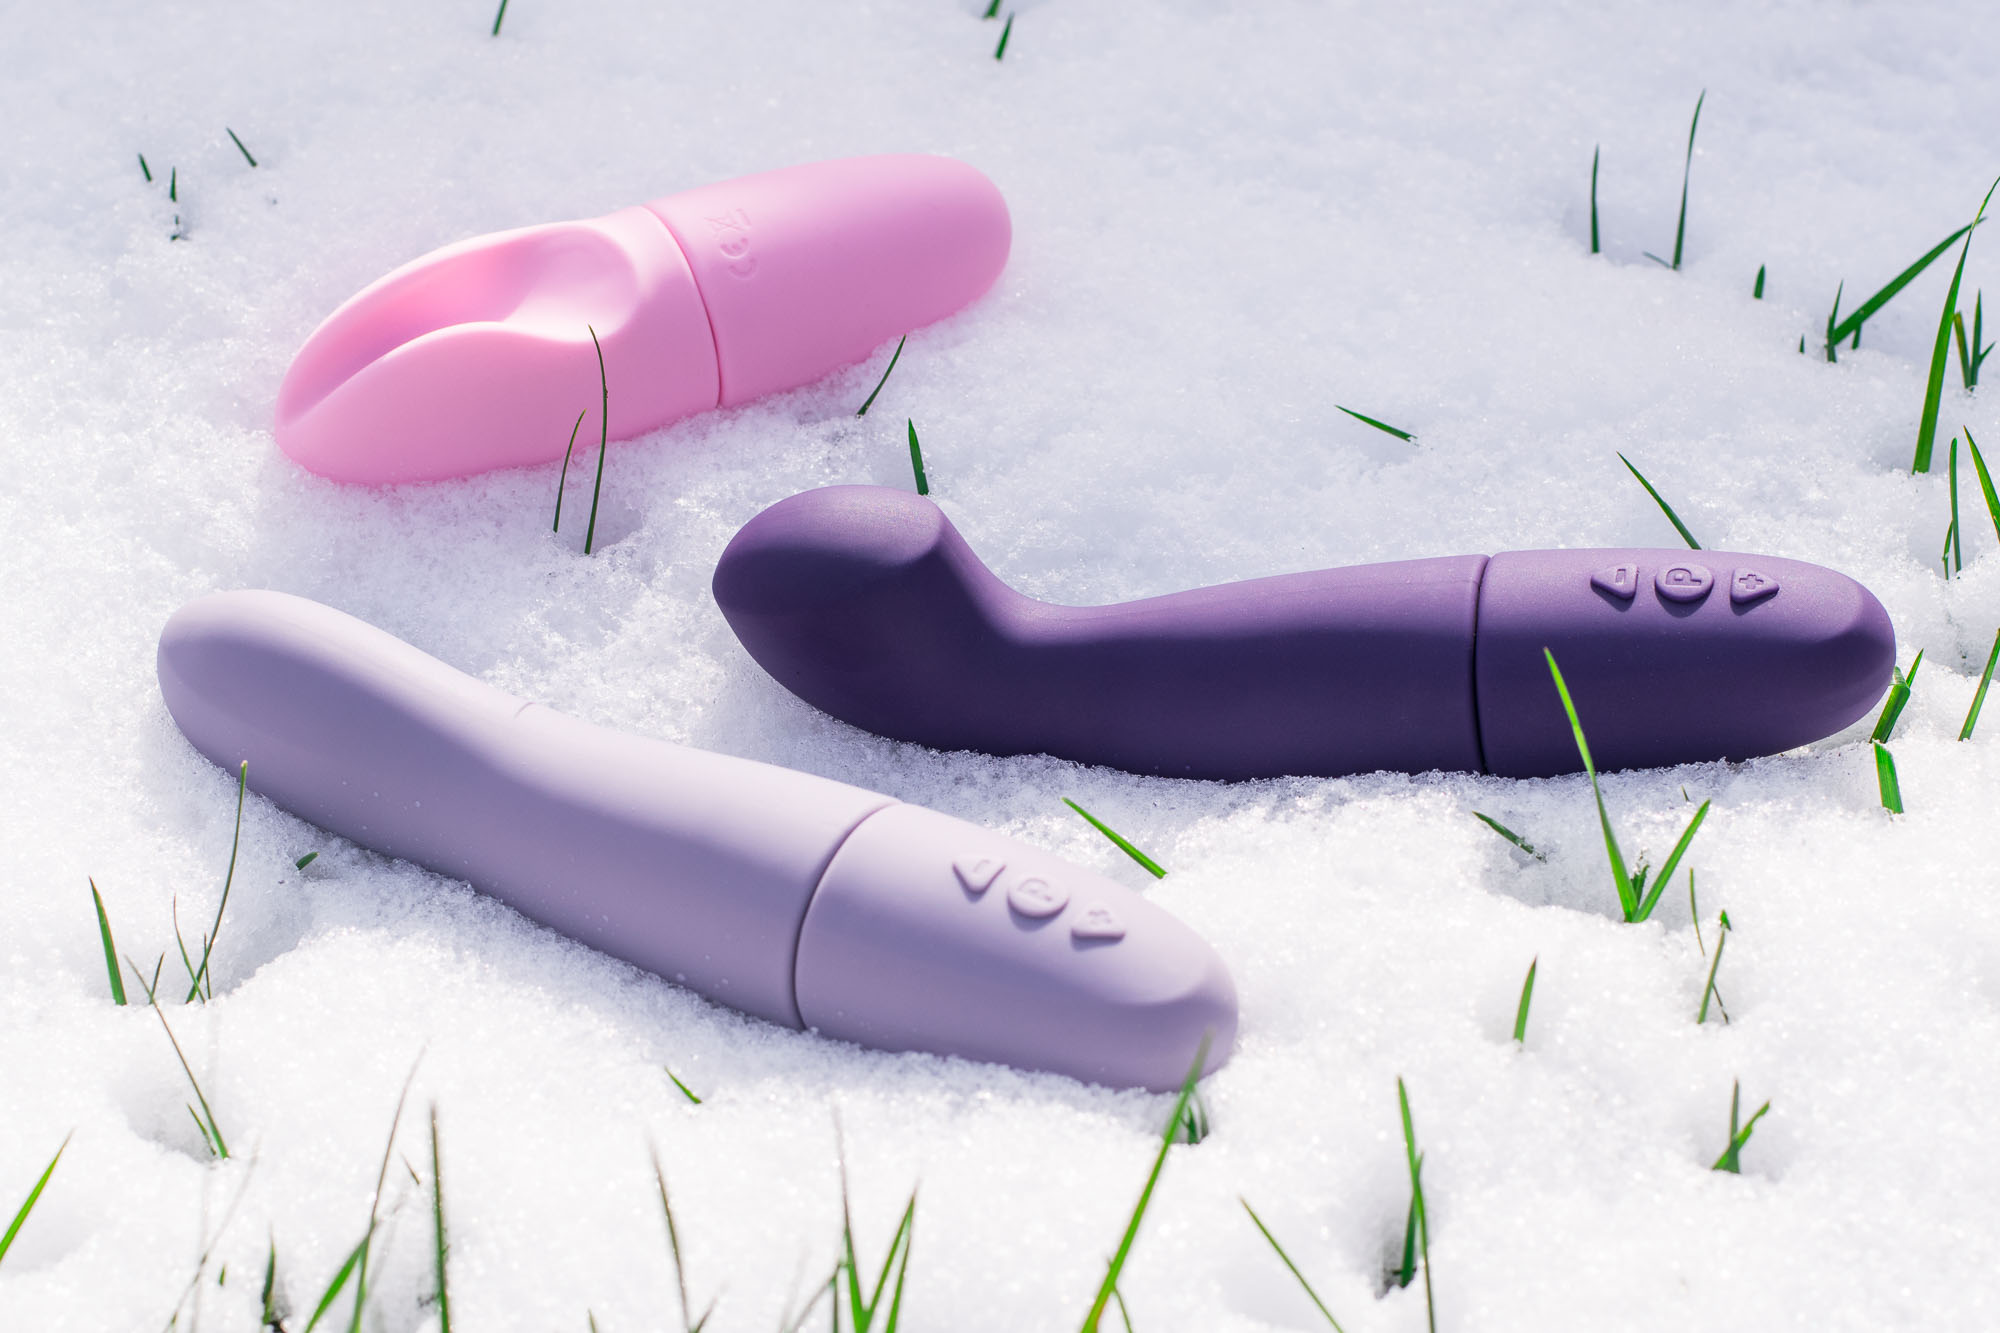 Tickler Toyfriend Smooth Operators: Snazzy (pink), Choosy (purple), Classy (mauve), lying in the snow.